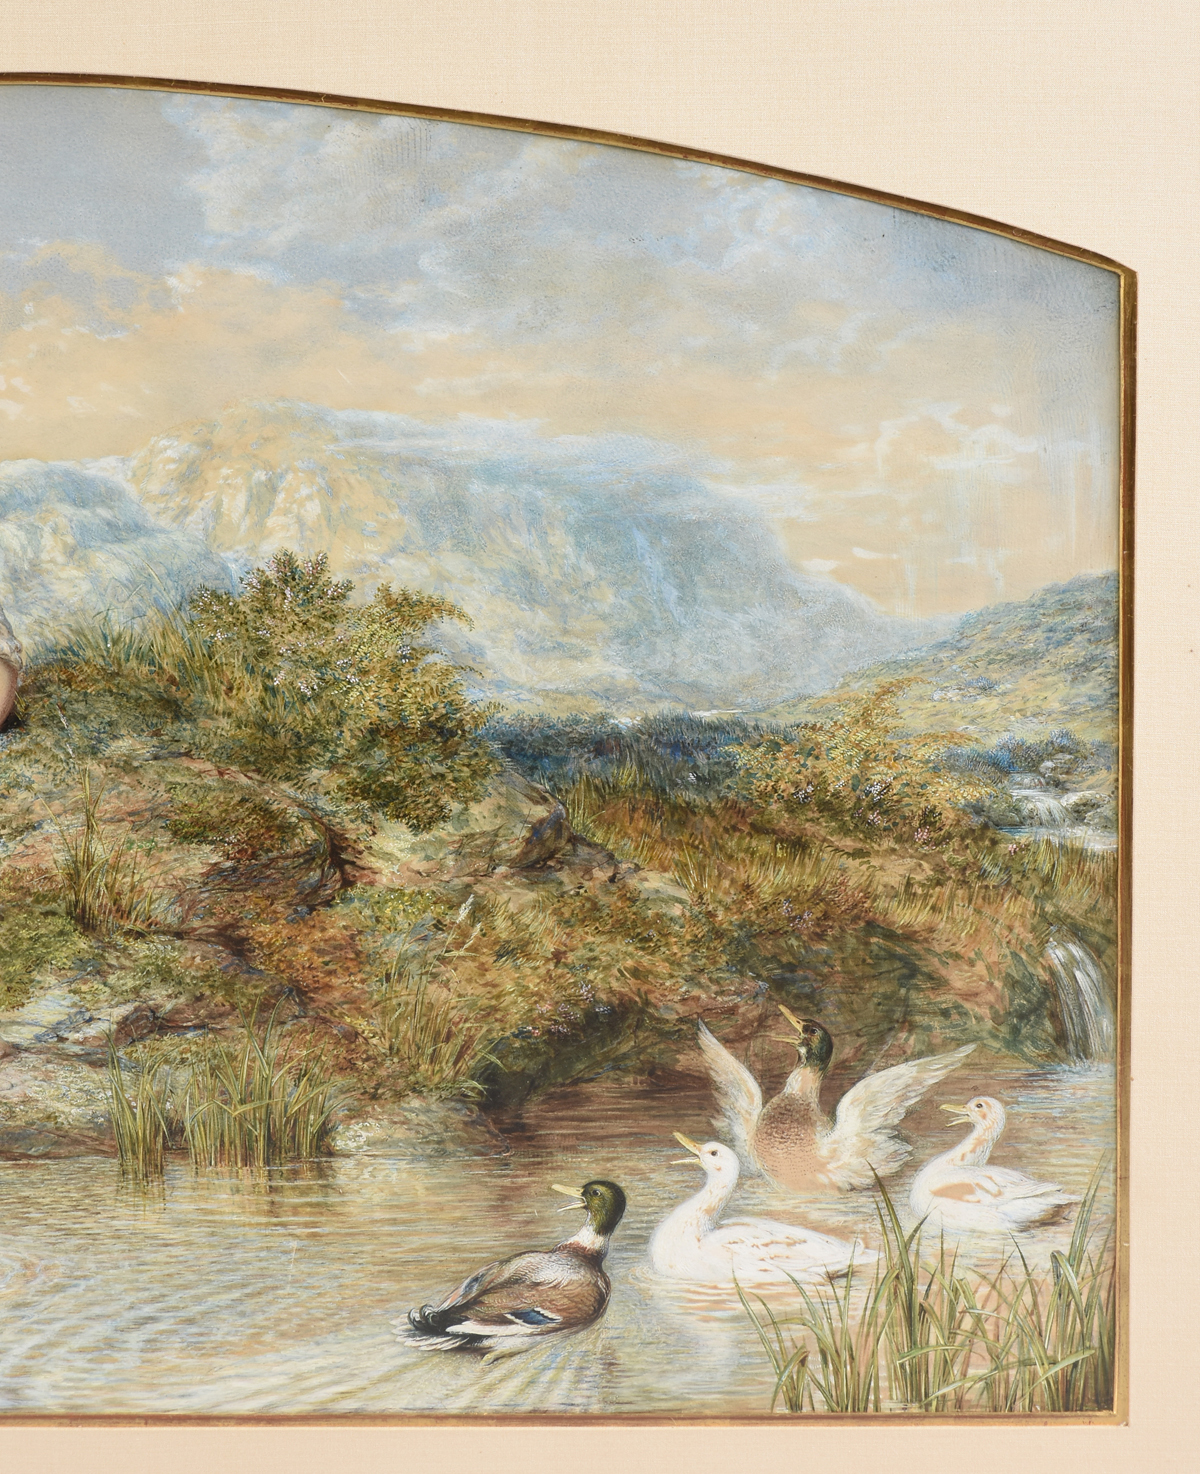 THOMAS JOHN EWBANK (Scottish a. 1826-1863) A PAINTING, "Water Gathering Young Couple and Ducks at - Image 4 of 12